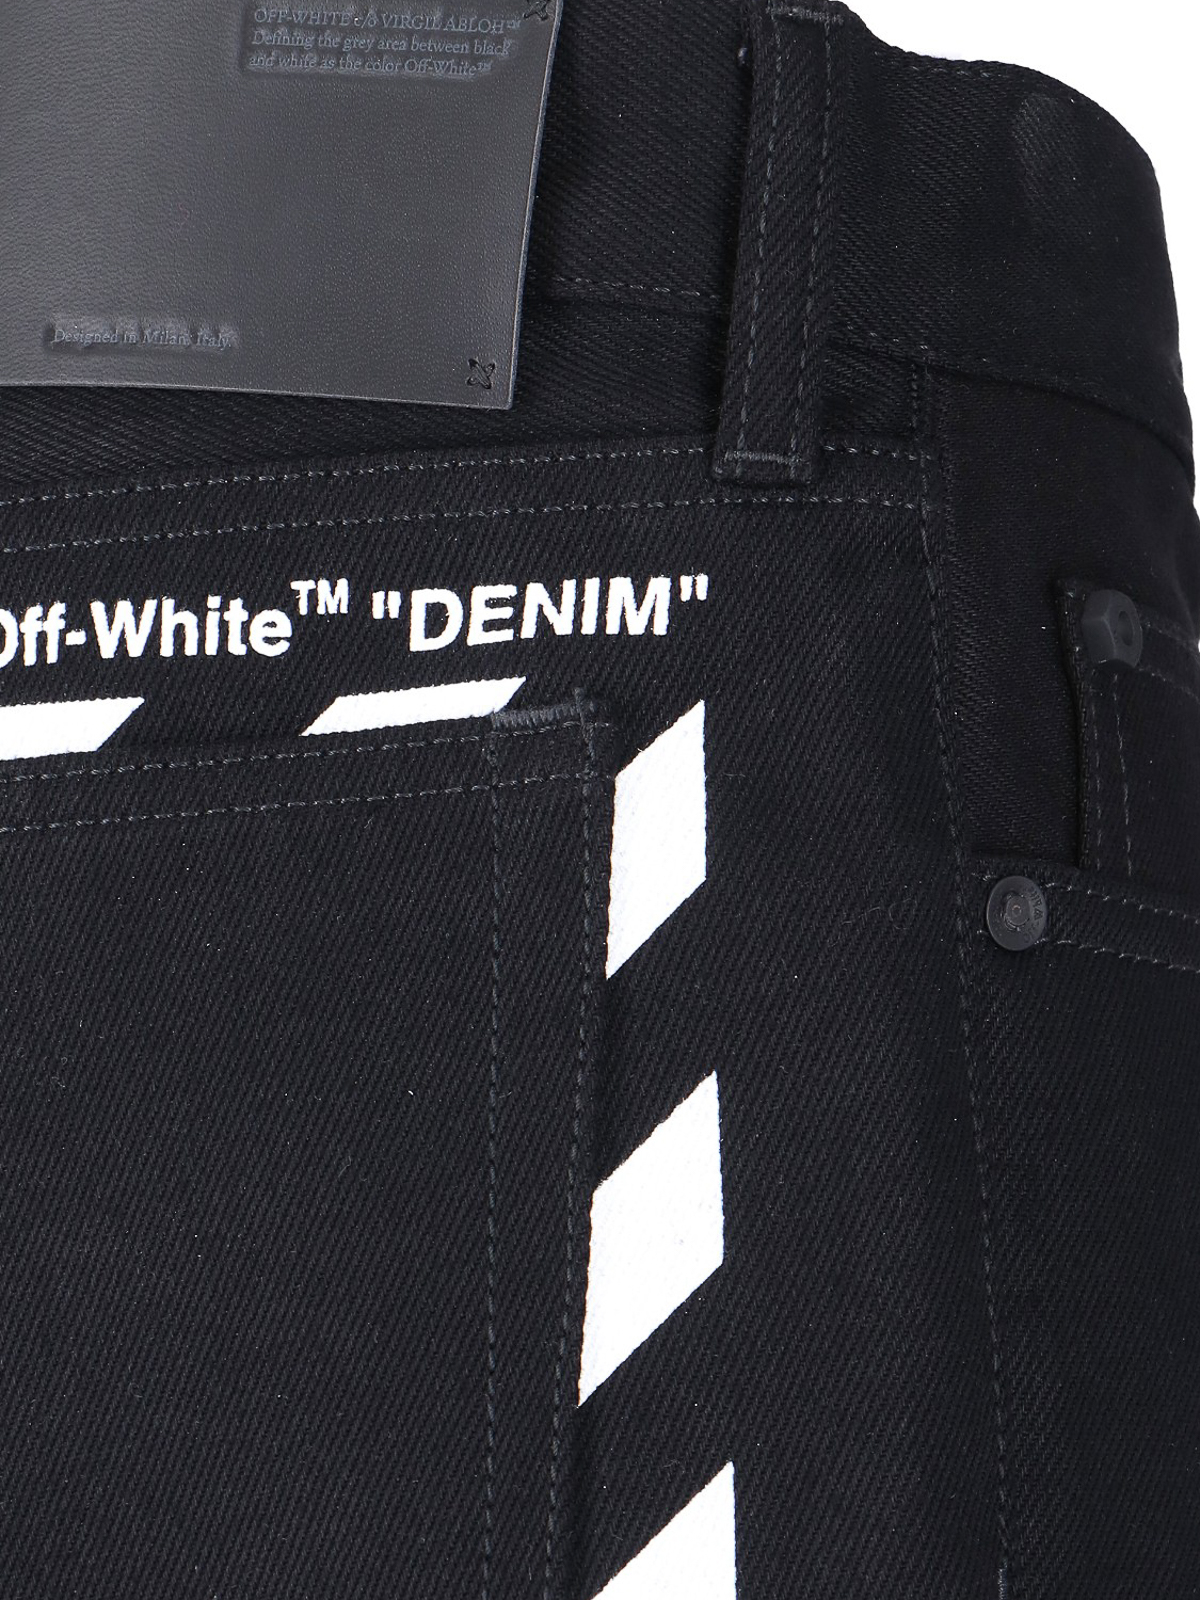 Off-White Men's Slim Jeans with Diag Print